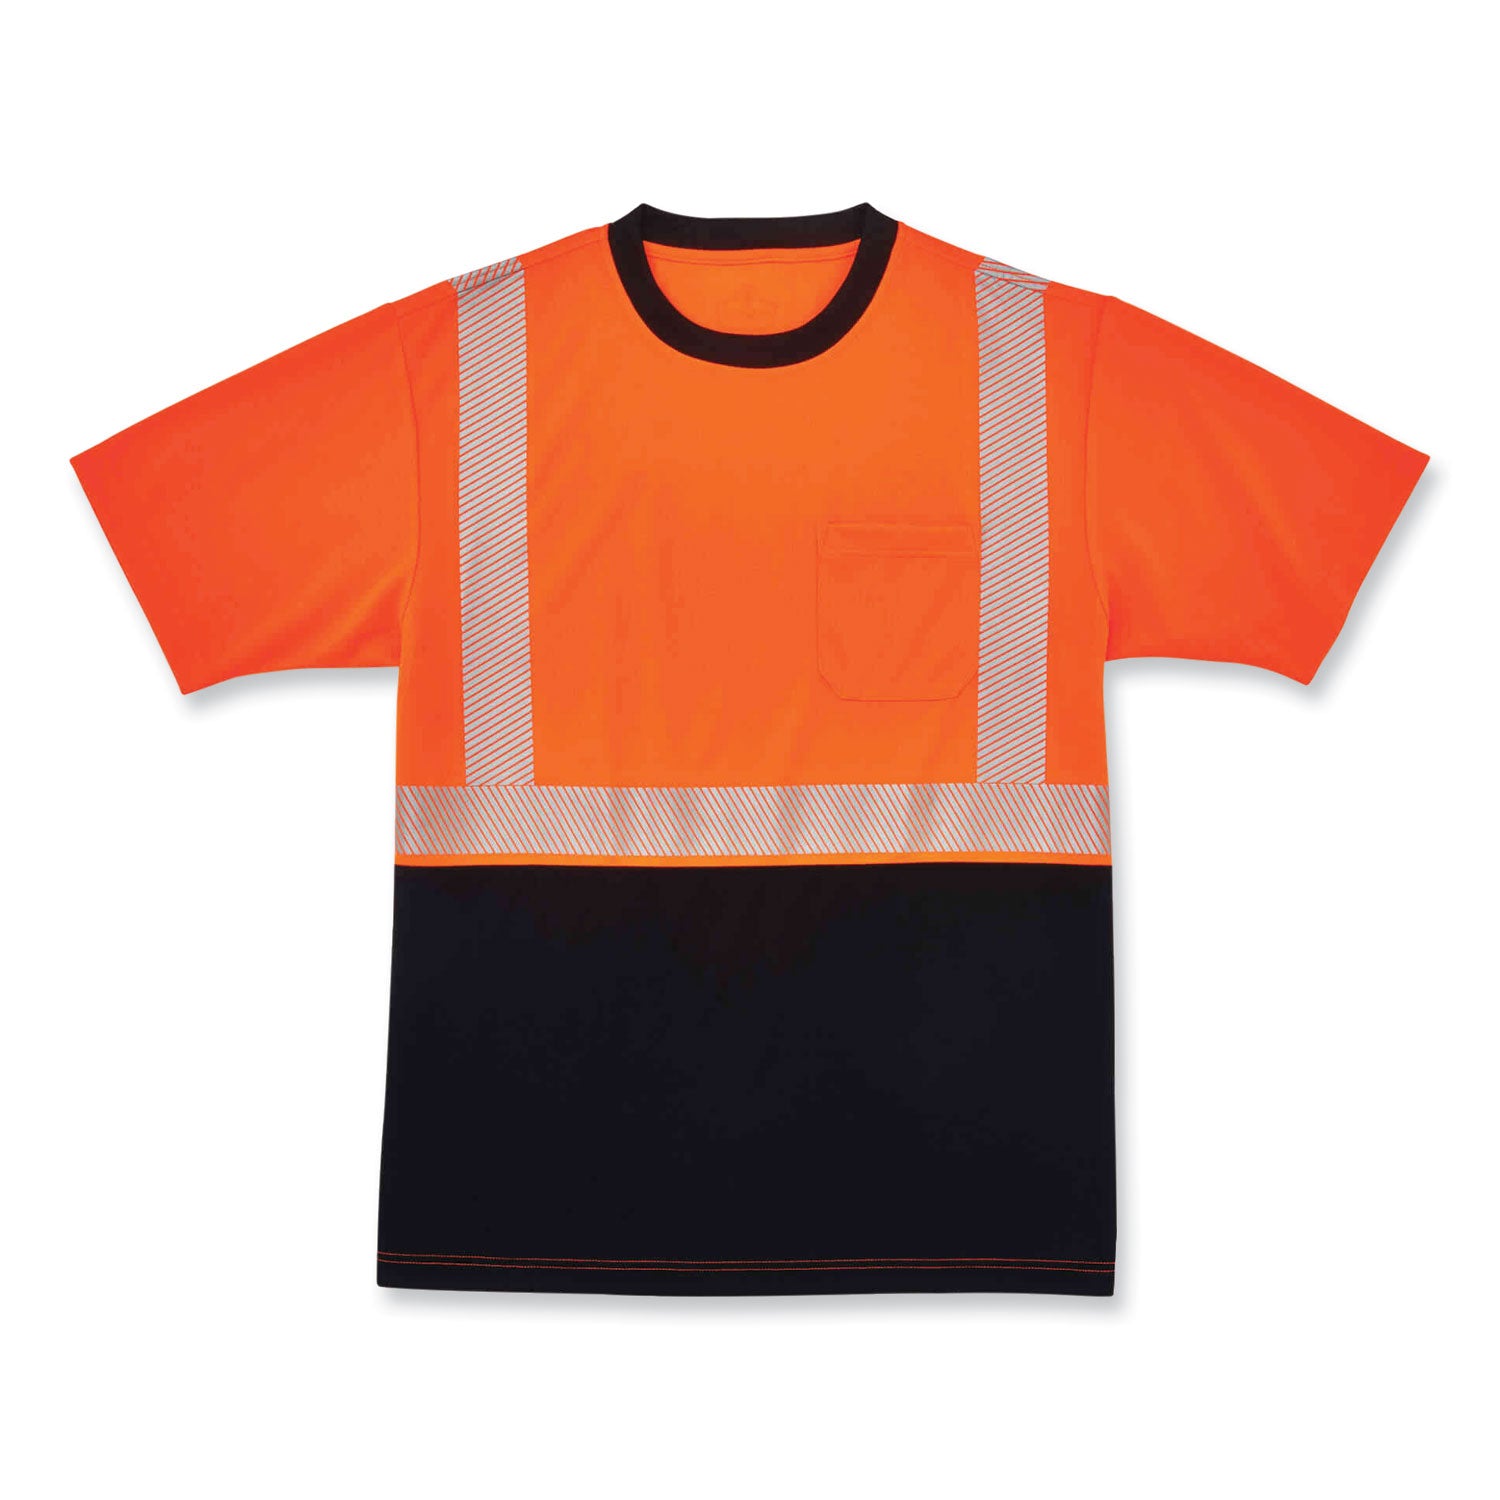 glowear-8280bk-class-2-performance-t-shirt-with-black-bottom-polyester-2x-large-orange-ships-in-1-3-business-days_ego22586 - 1